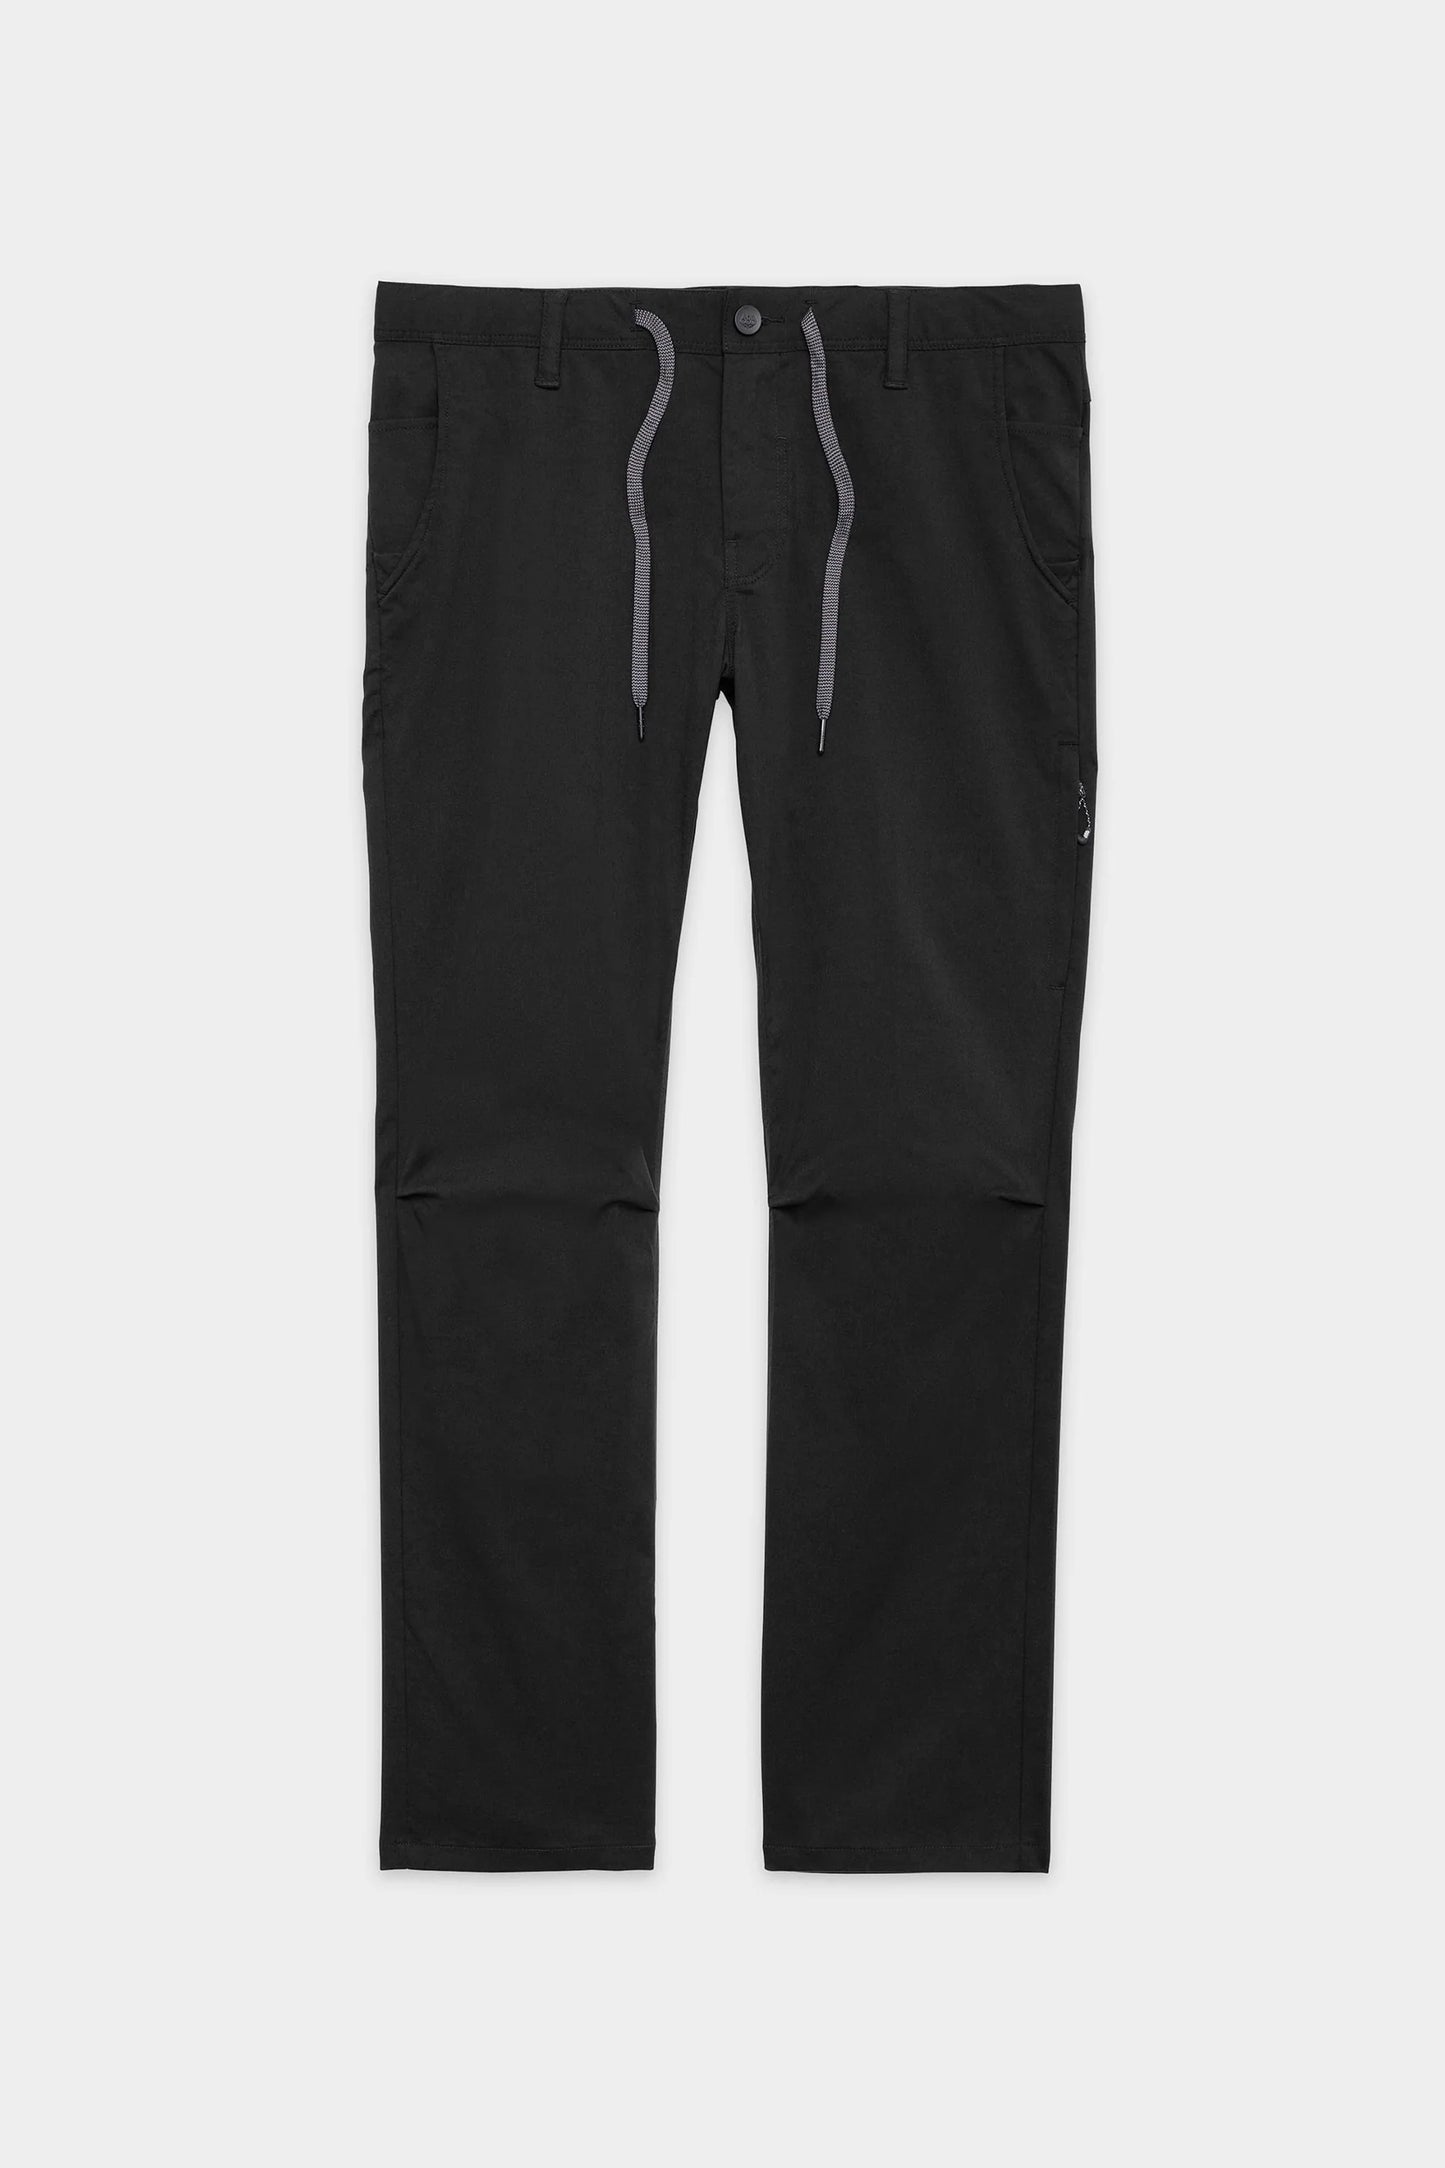 686 Men’s Everywhere Pant- Relaxed Fit